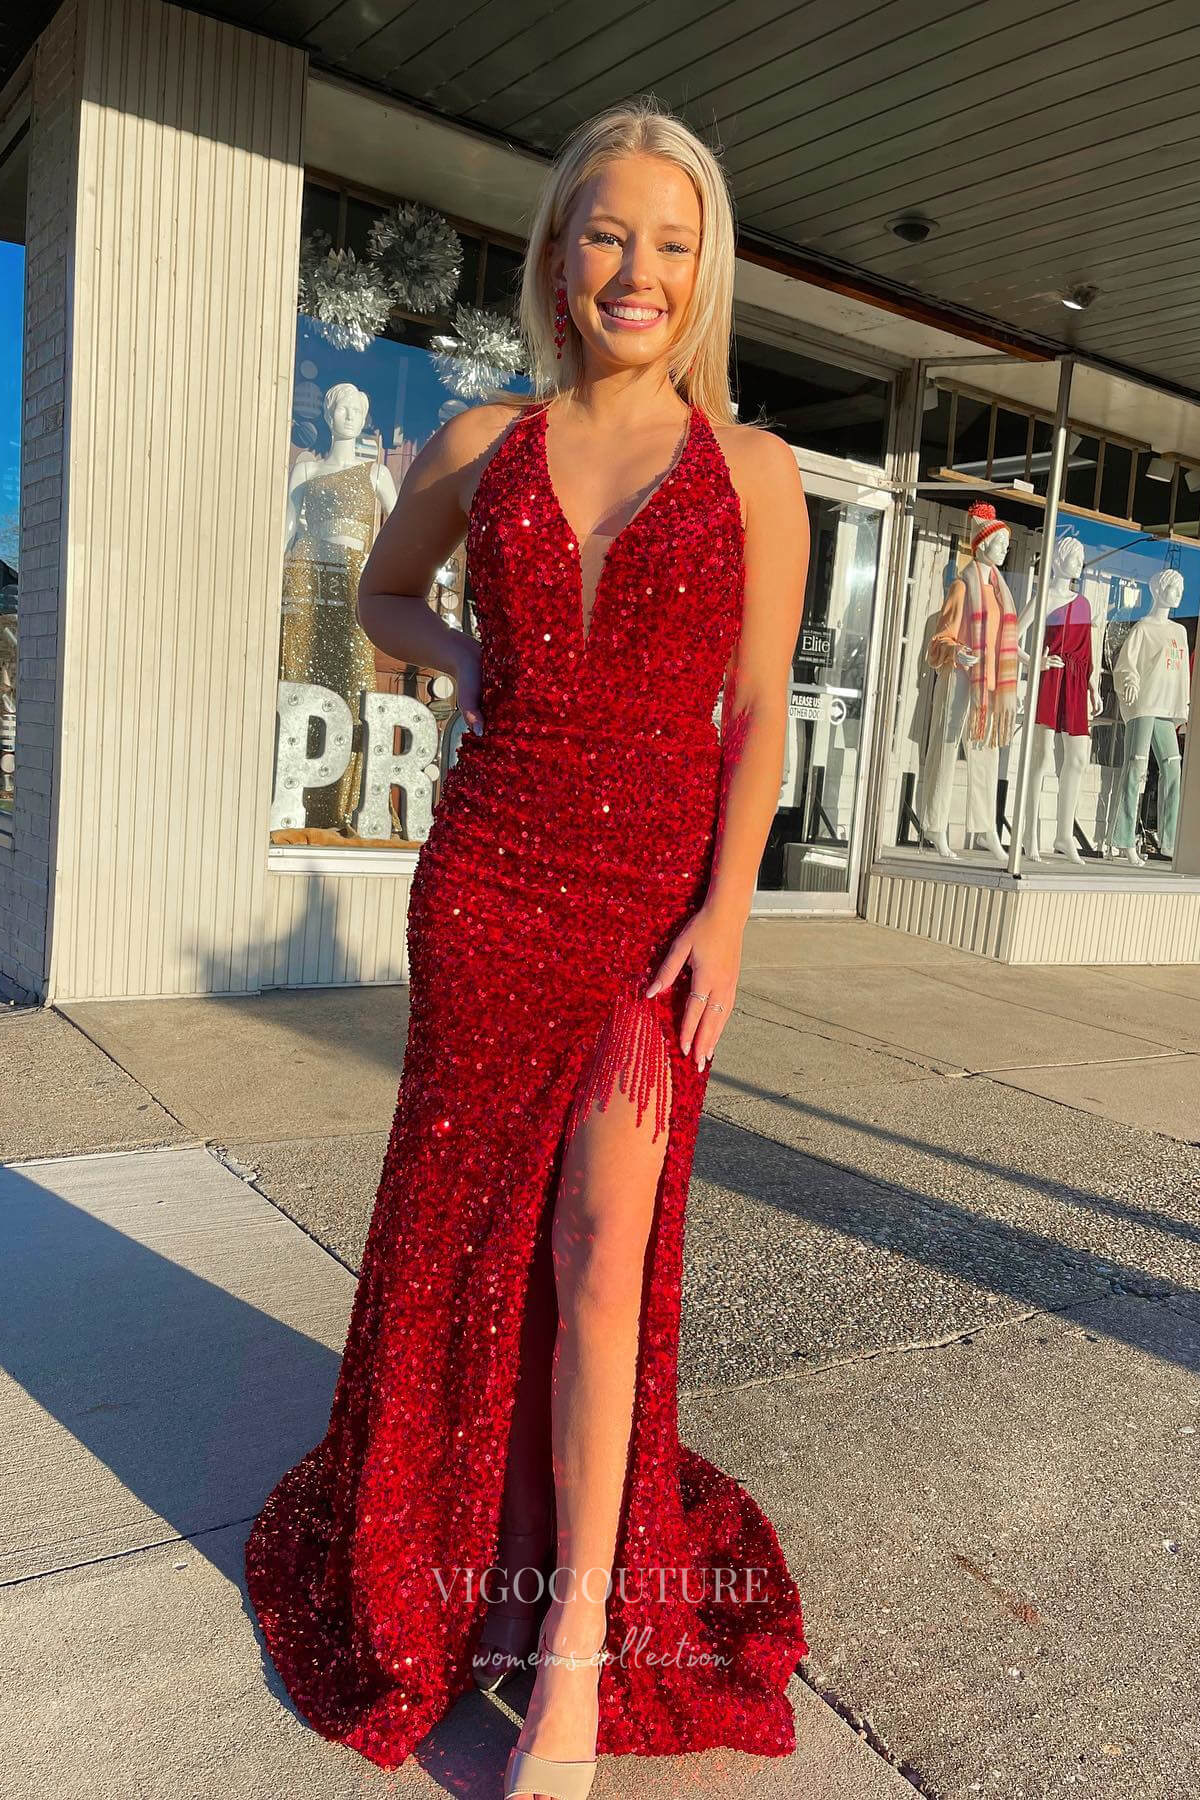 Shimmering Red Sequin Mermaid Prom Dress with Plunging V-Neck and High Slit 22208-Prom Dresses-vigocouture-Red-Custom Size-vigocouture